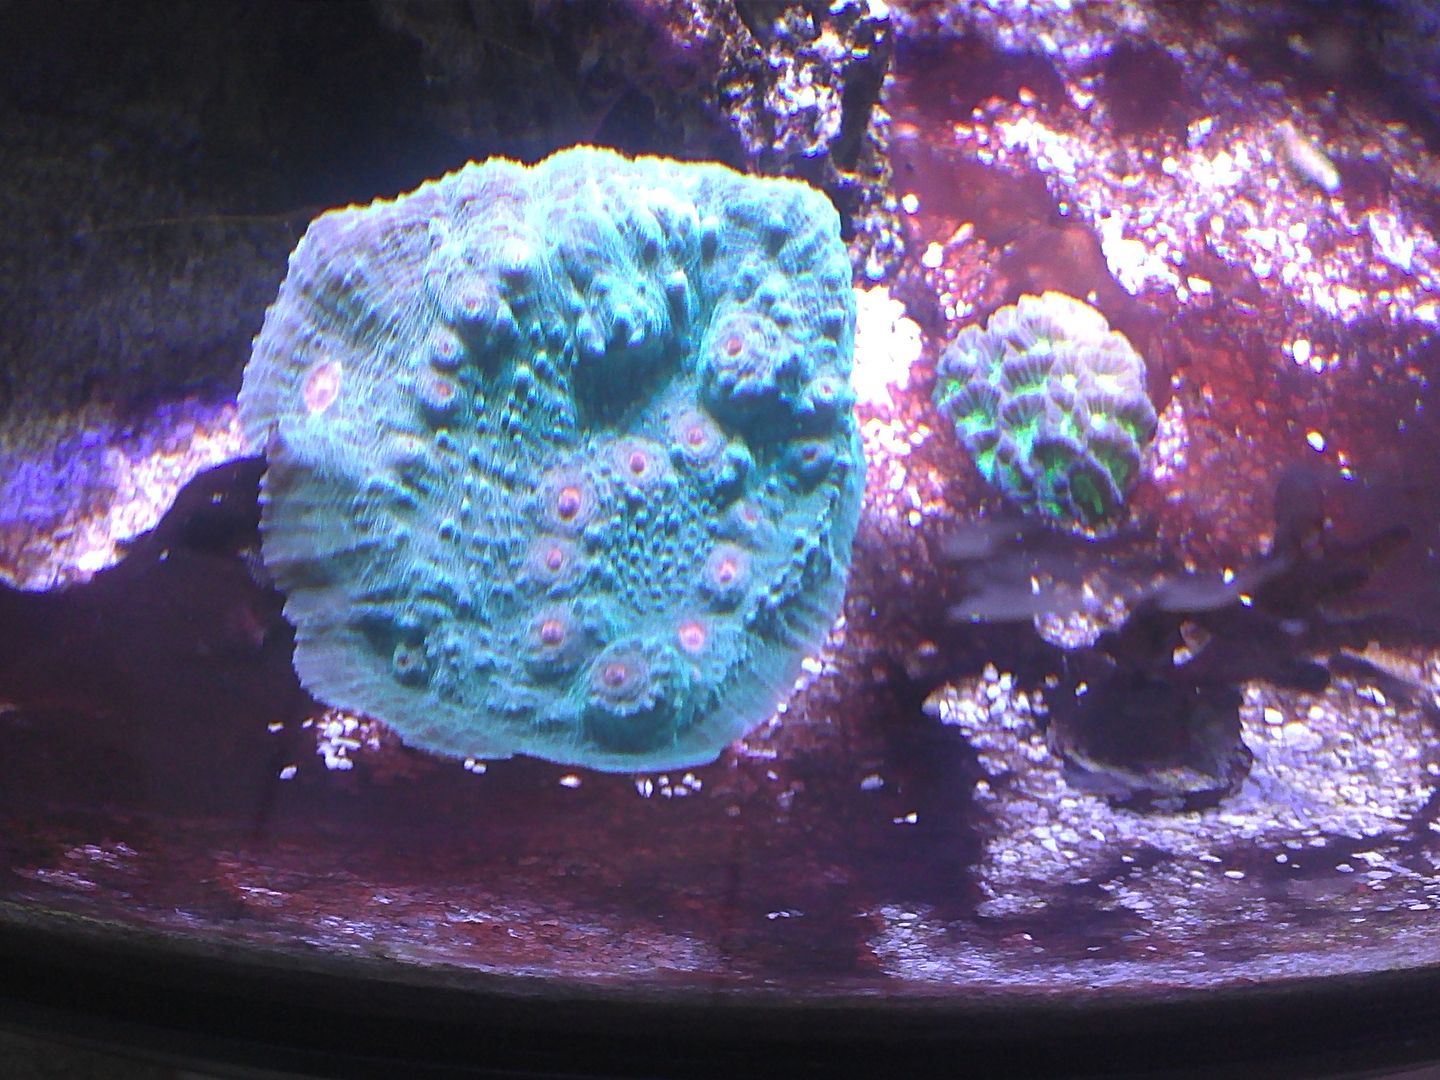 IMG525 zps06eb1a12 - Selling All Corals in 24g $200 as a package